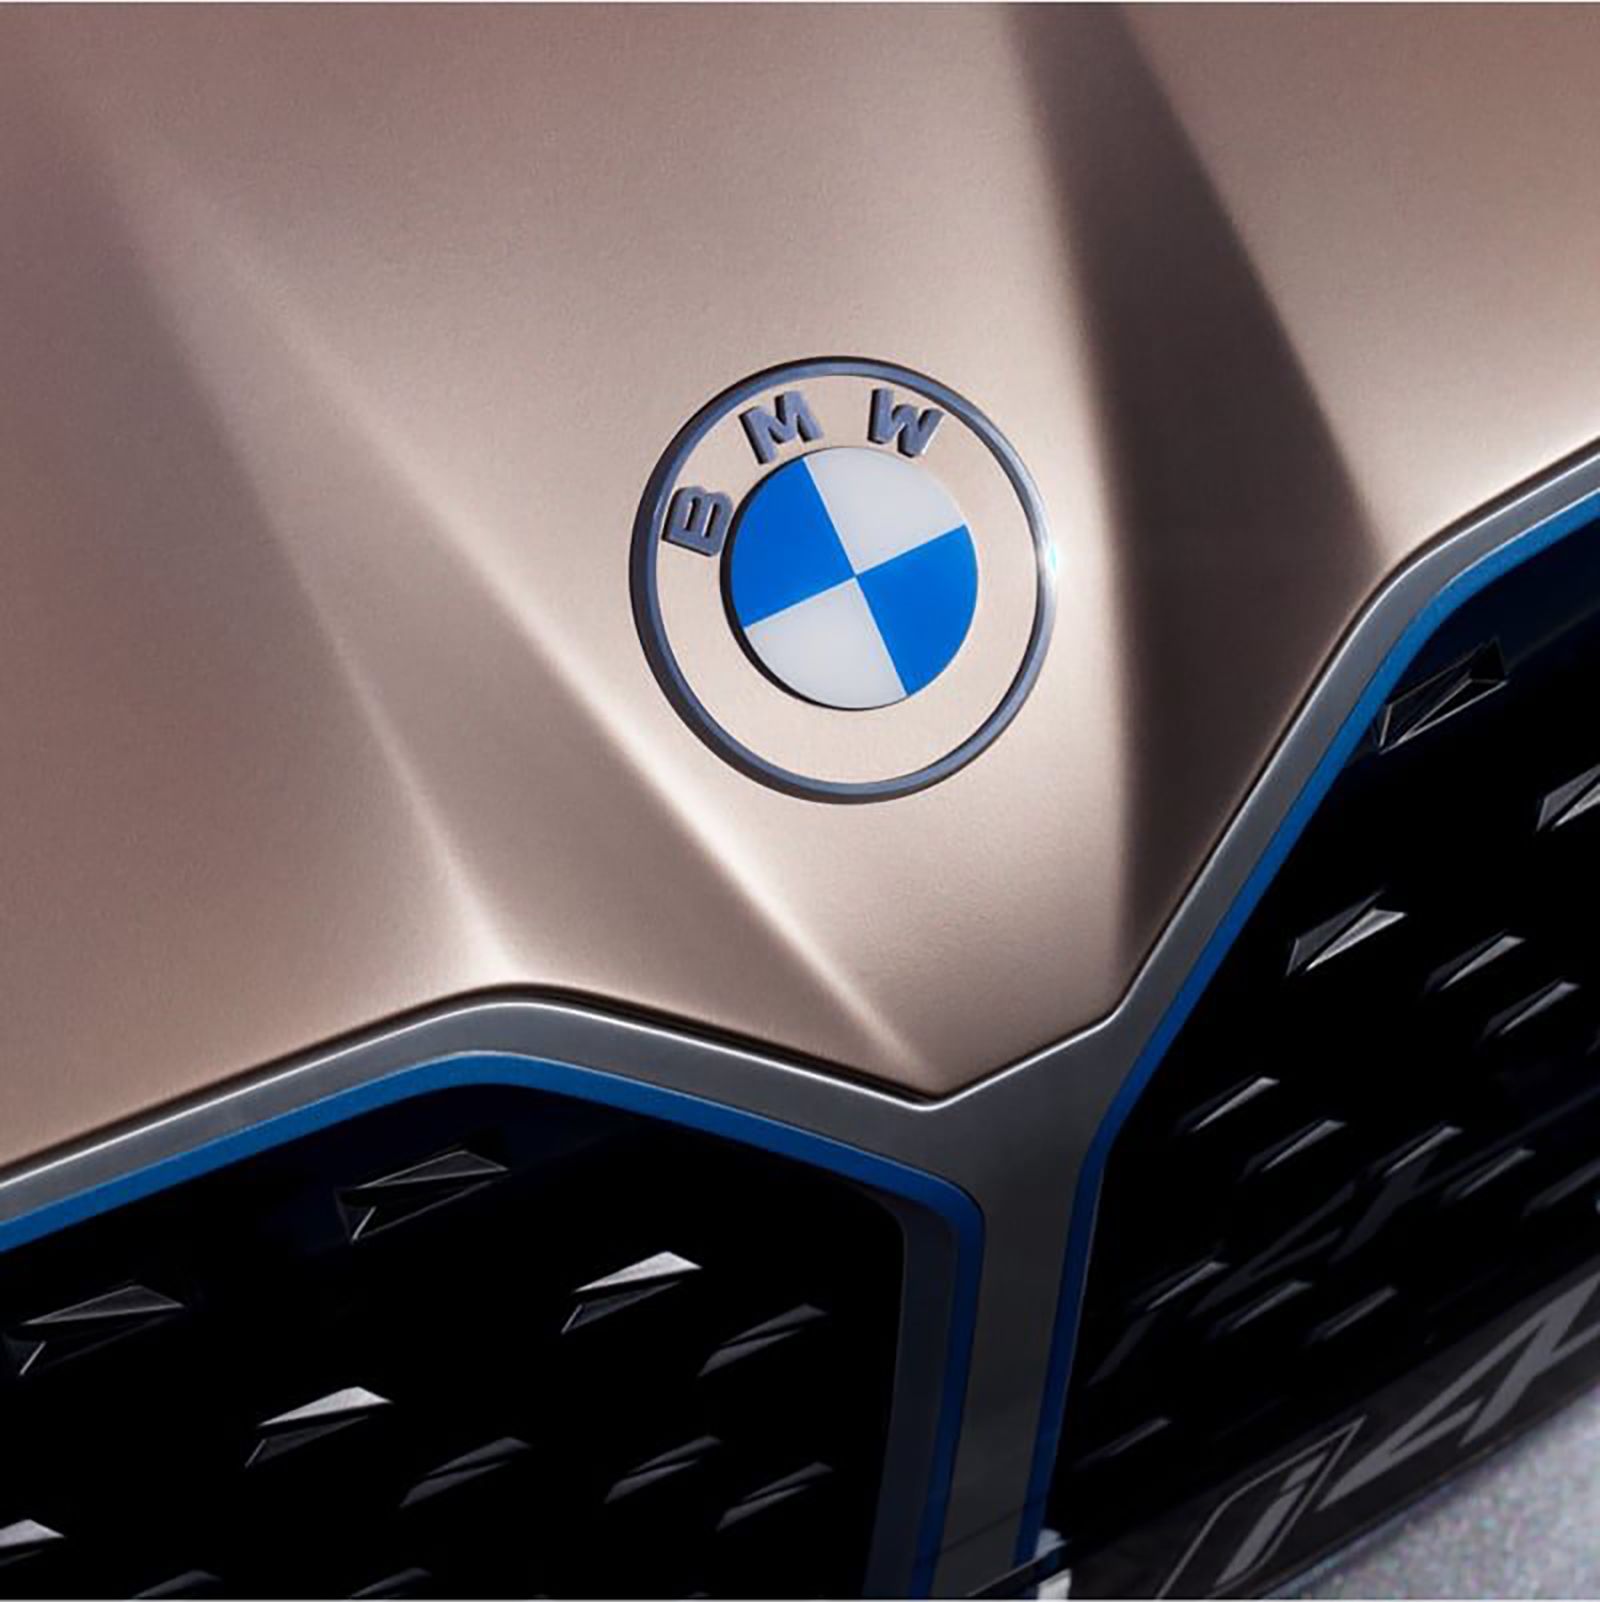 BMW redesigns its iconic logo